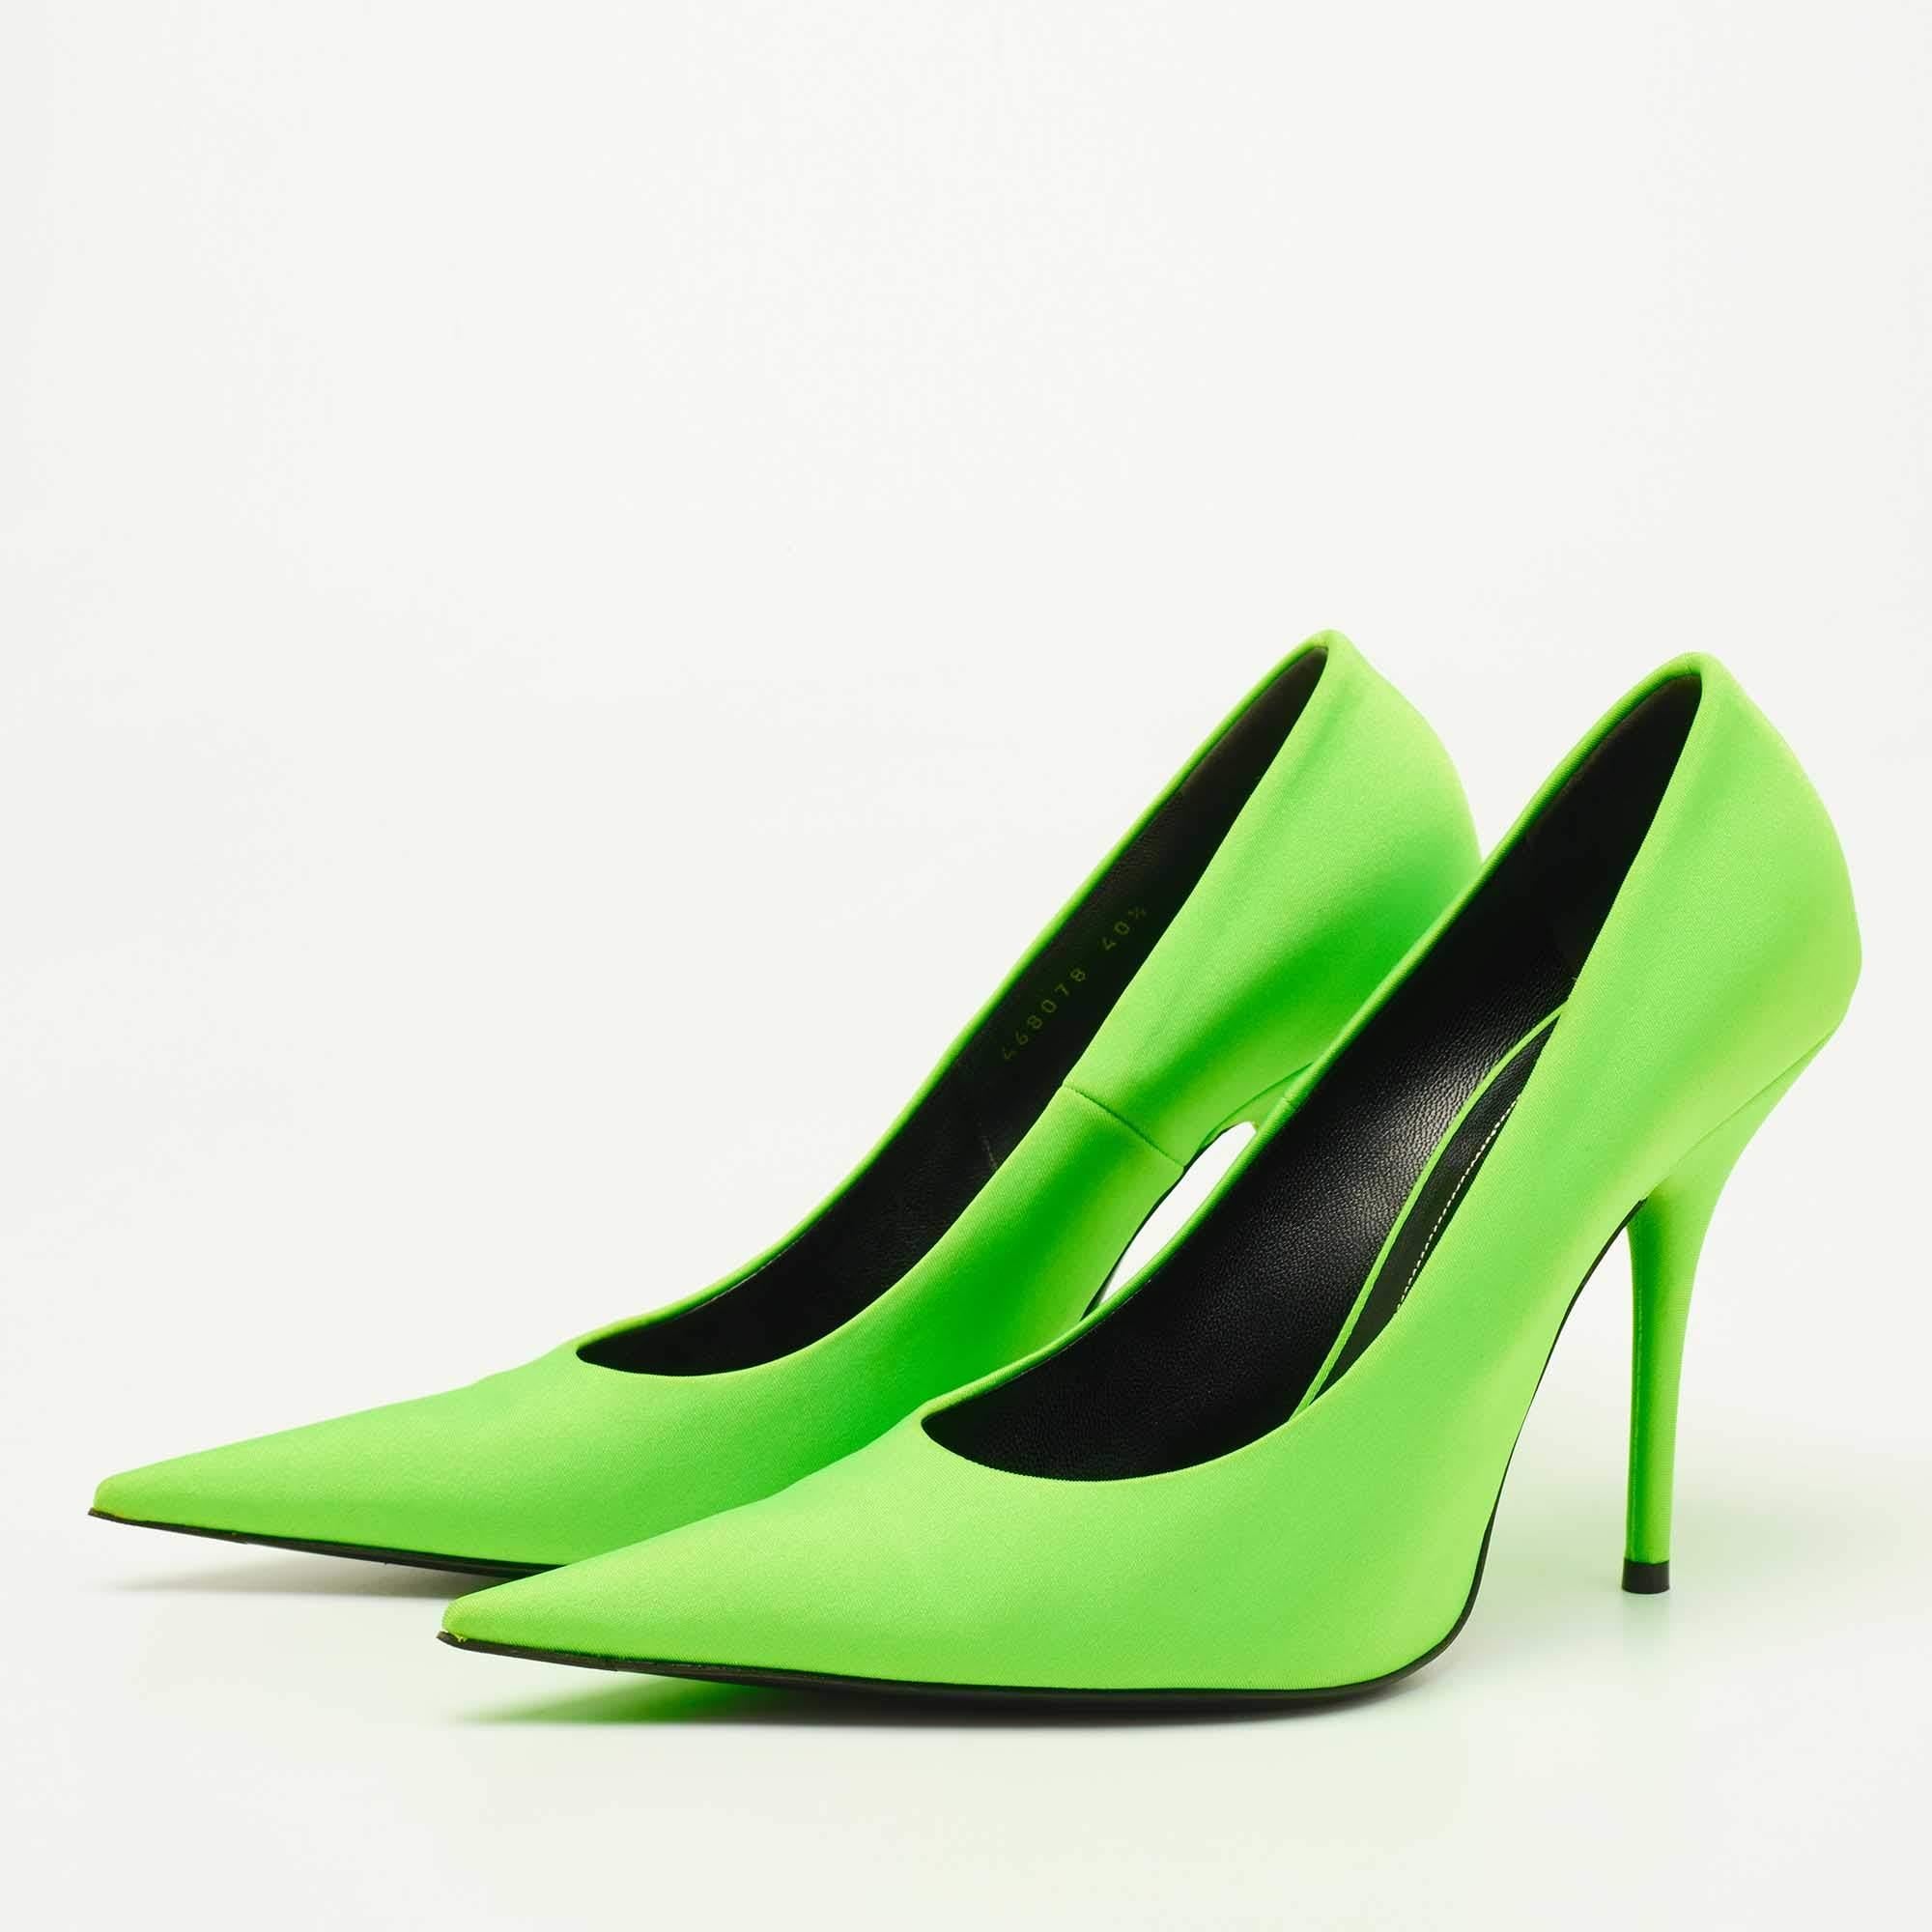 Sleek and sharp, this pair of Balenciaga pumps will complement a variety of outfits in your wardrobe. The nylon creation features a green hue and pointed toes. Elevated on 11.5cm heels, it will take your fashion statement a notch higher.

